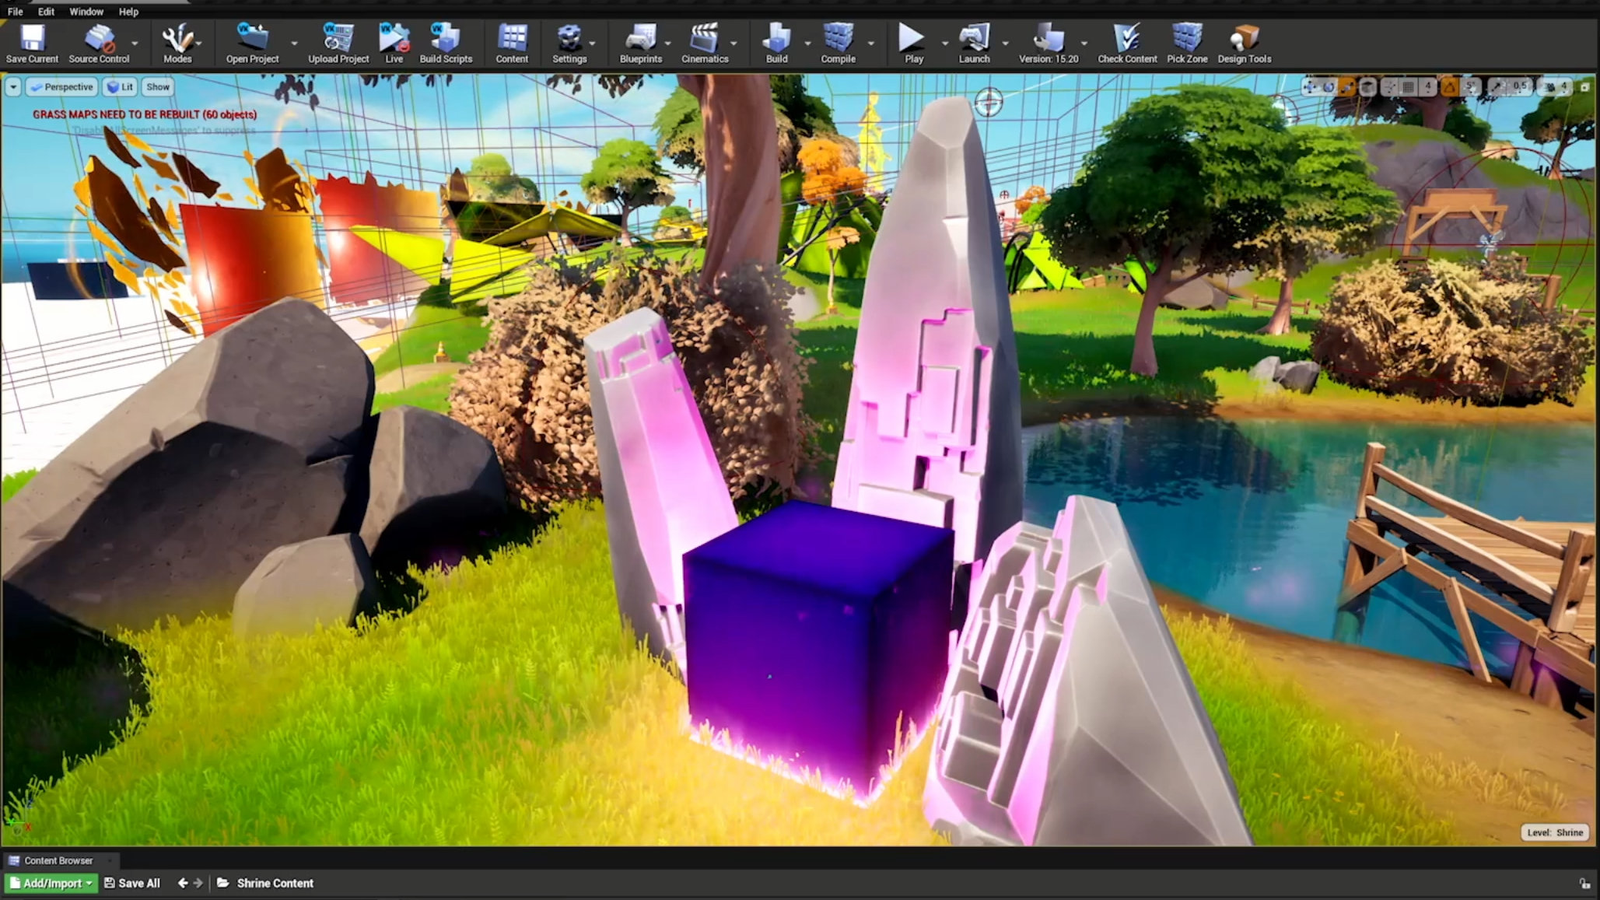 Unreal Editor for Fortnite Beta Launches to Create Custom Worlds